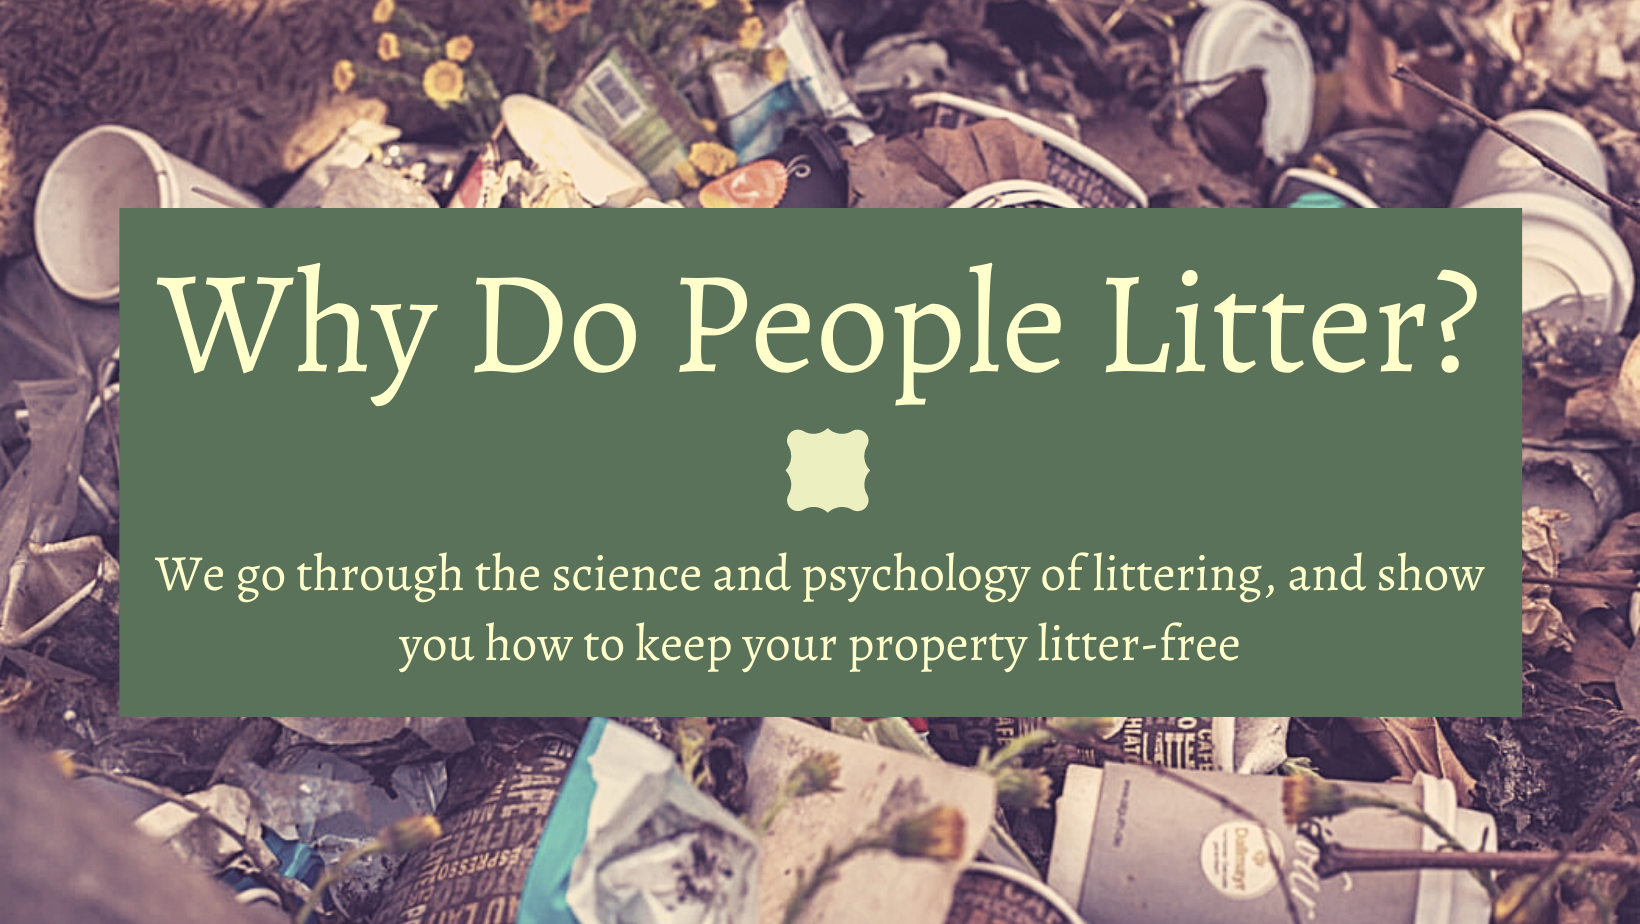 A photo of litter, with the text: Why do people litter? We go through the science and psychology of littering, and show you how to keep your property litter-free.